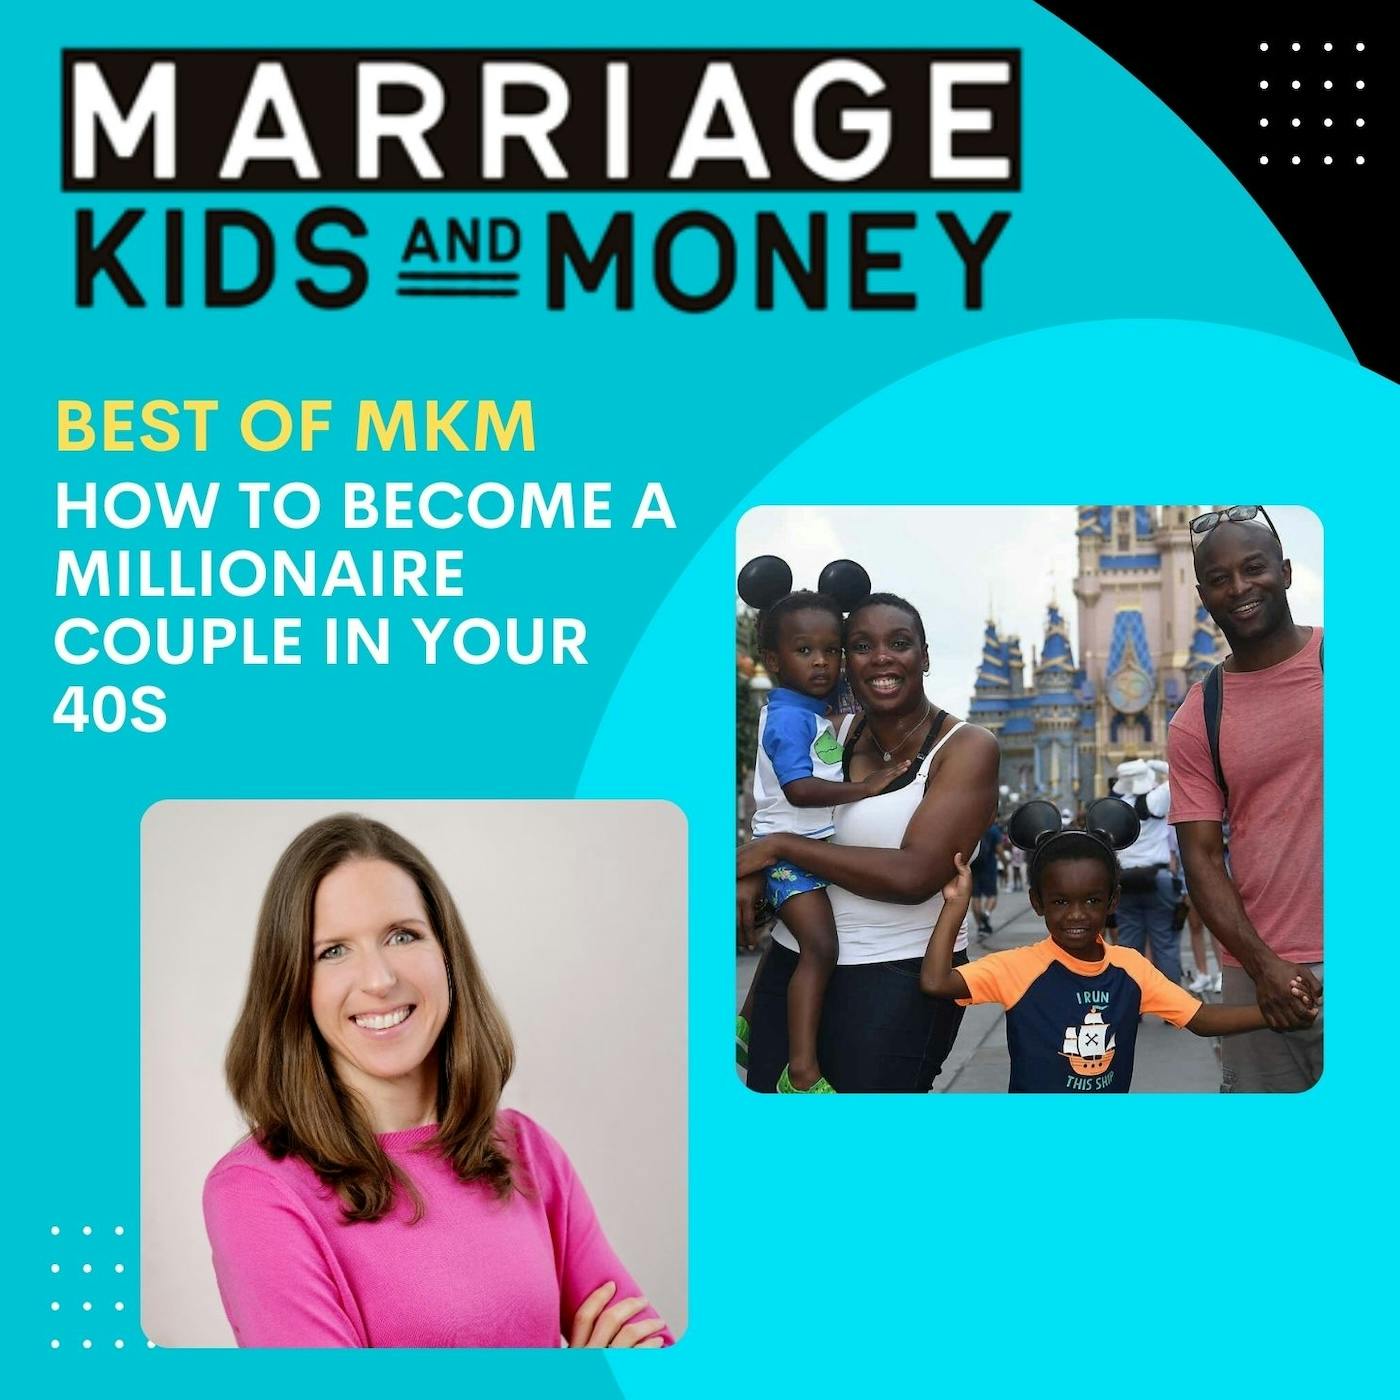 How to Become a Millionaire Couple in Your 40s (BEST OF MKM)